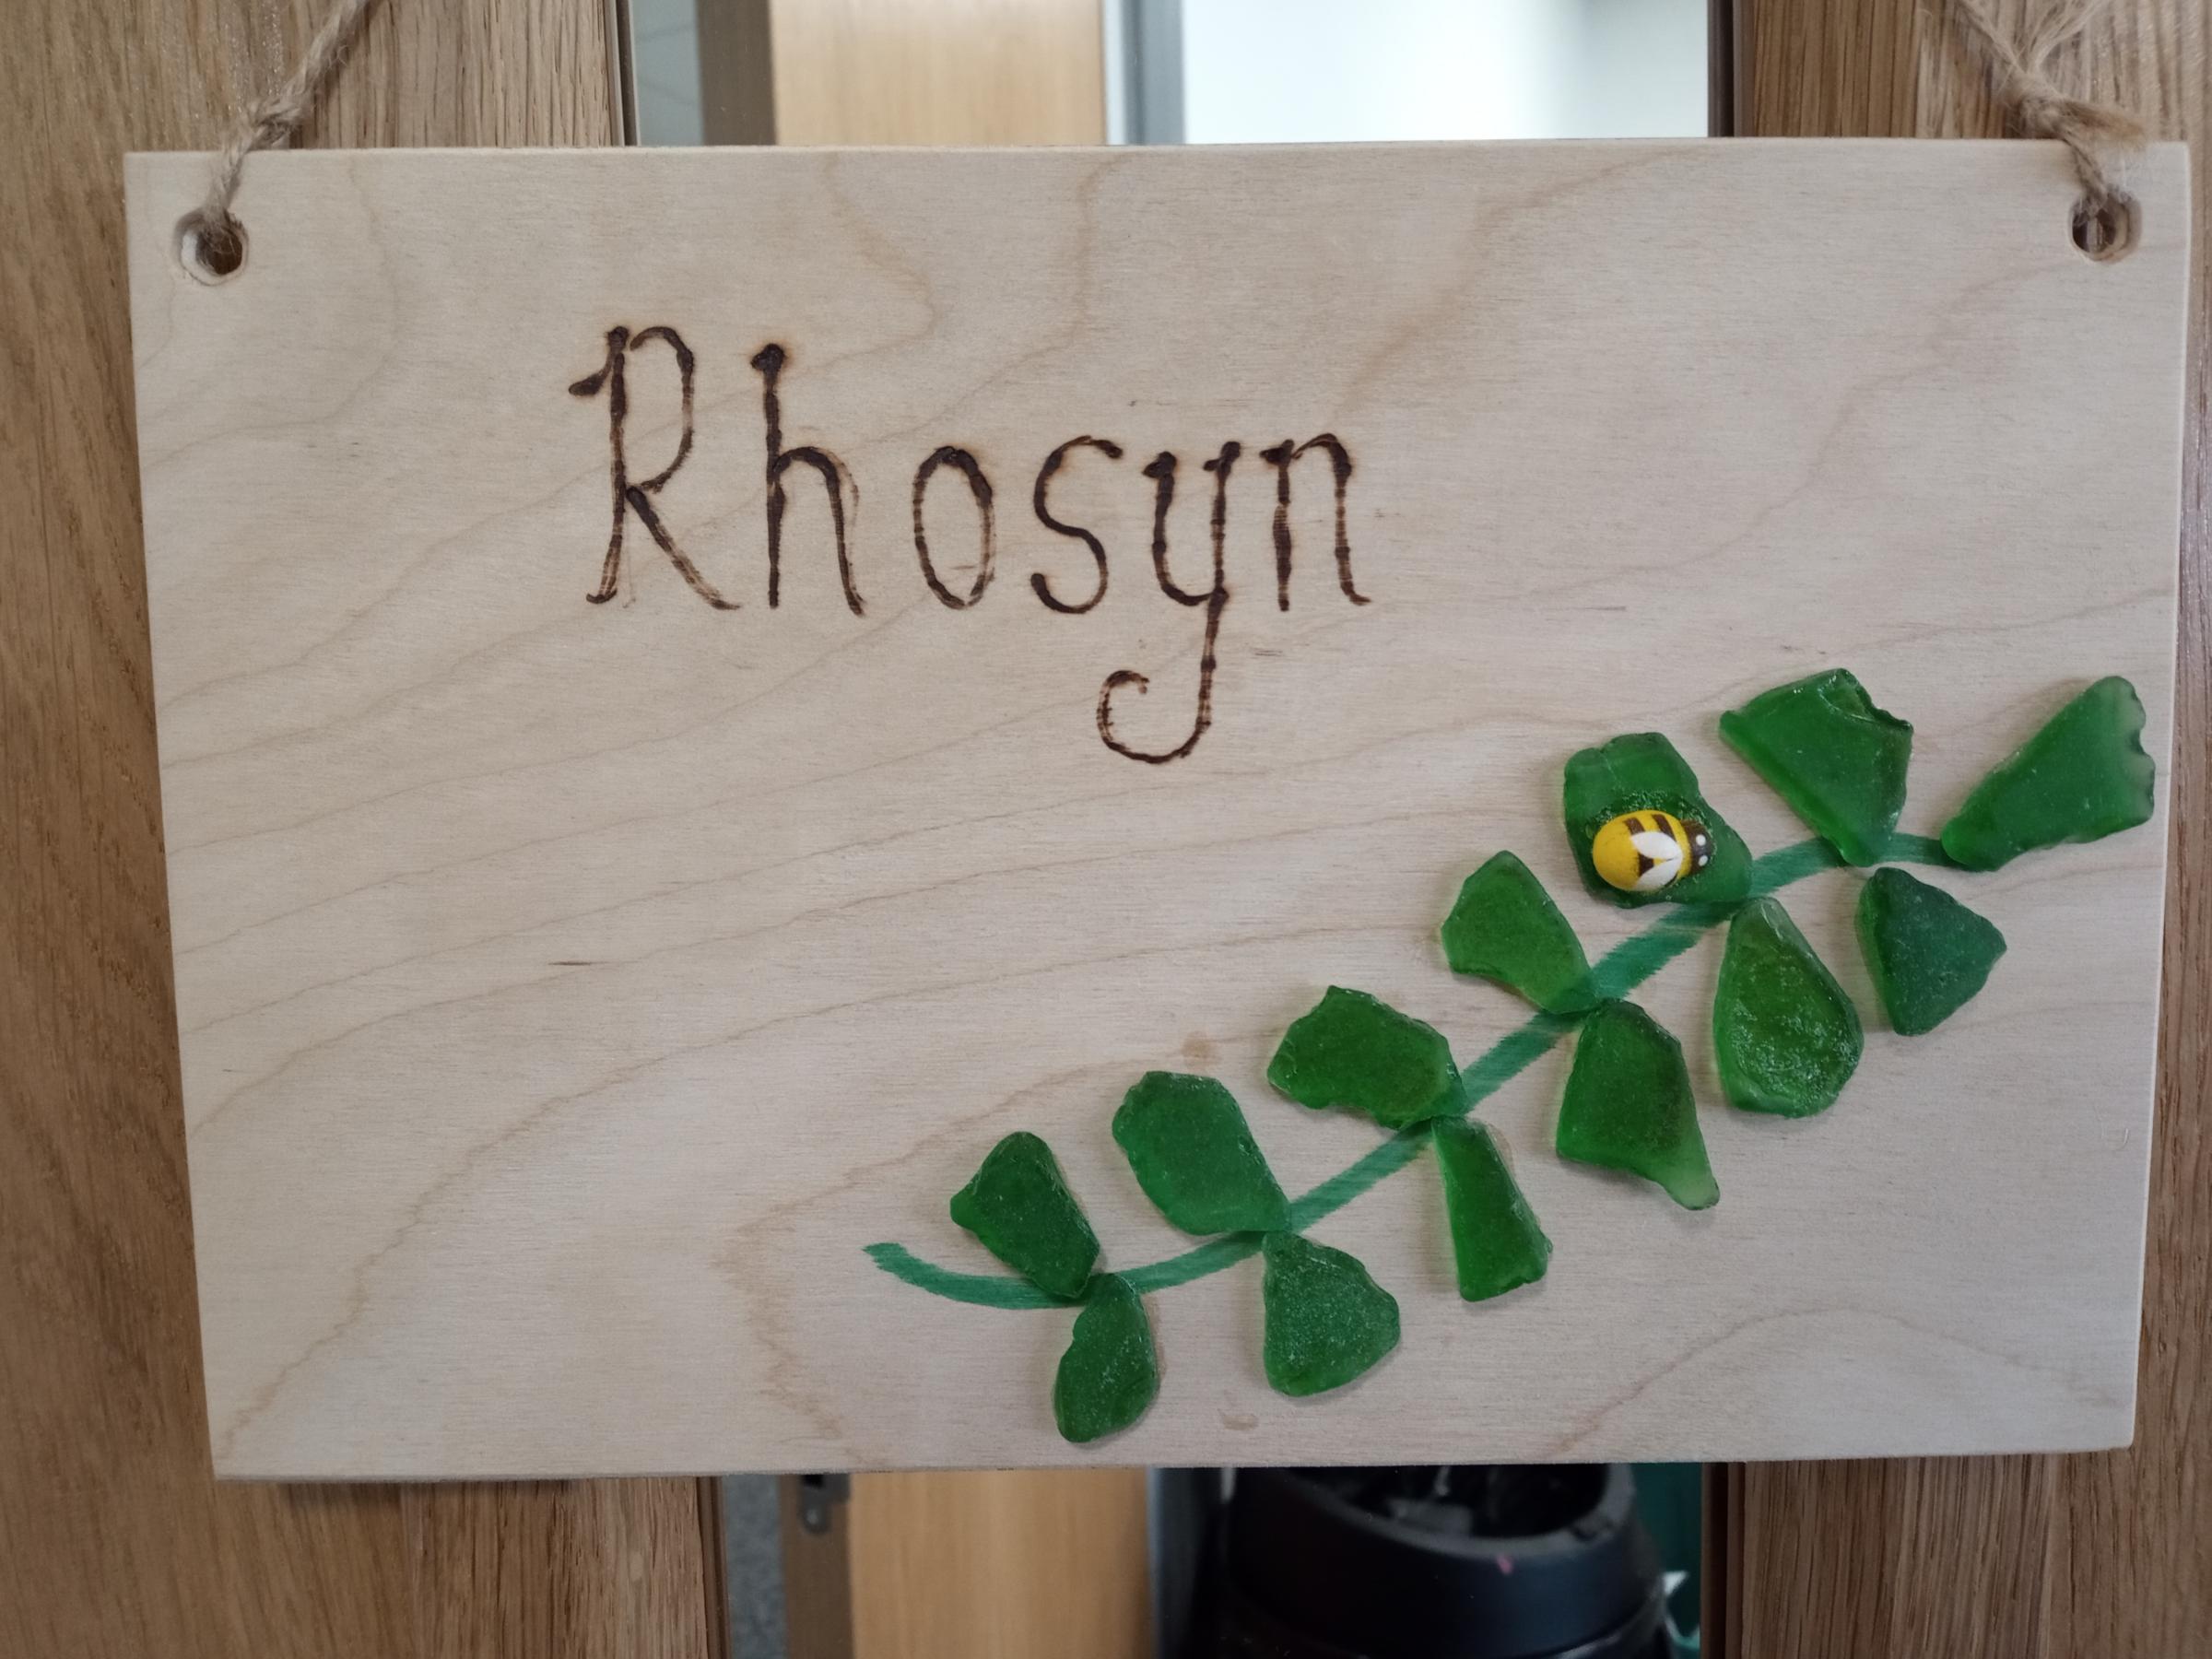 Each classroom at Borras Park Primary School is named after a flower (rhosyn/rose).